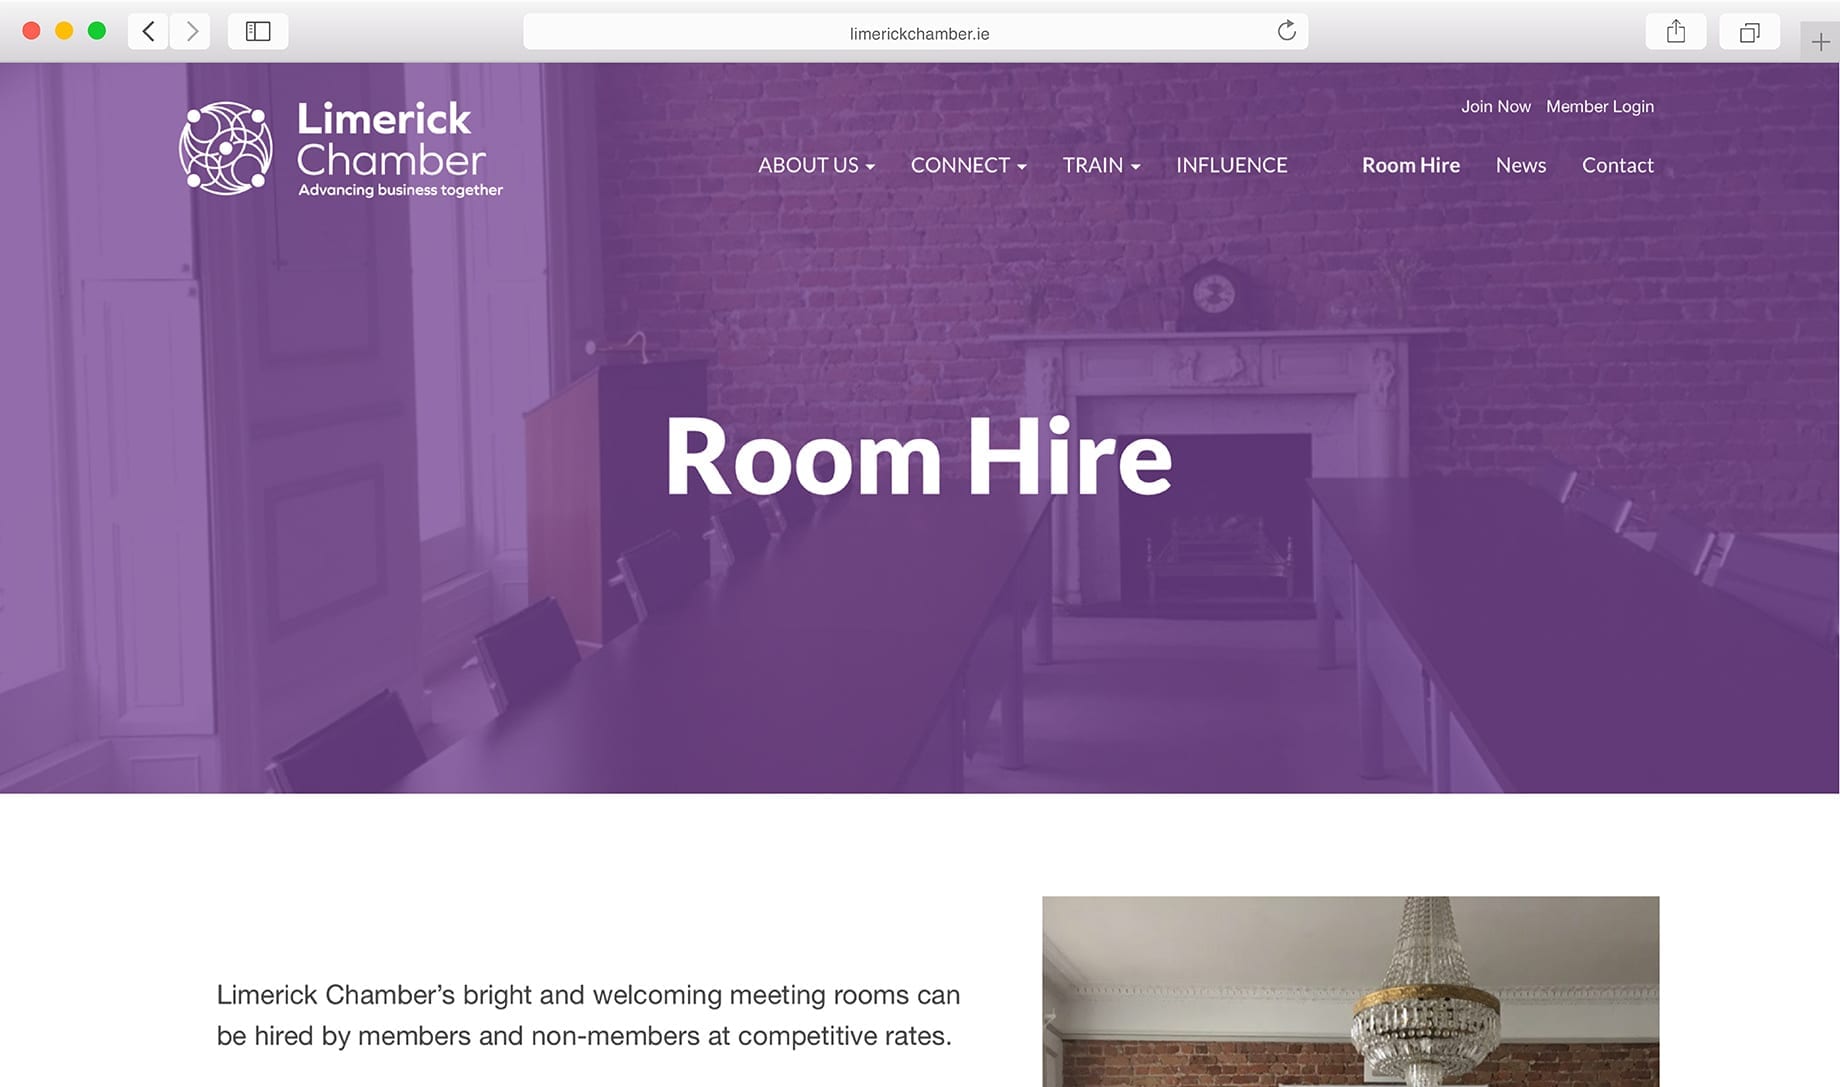 Room Hire at Limerick Chamber